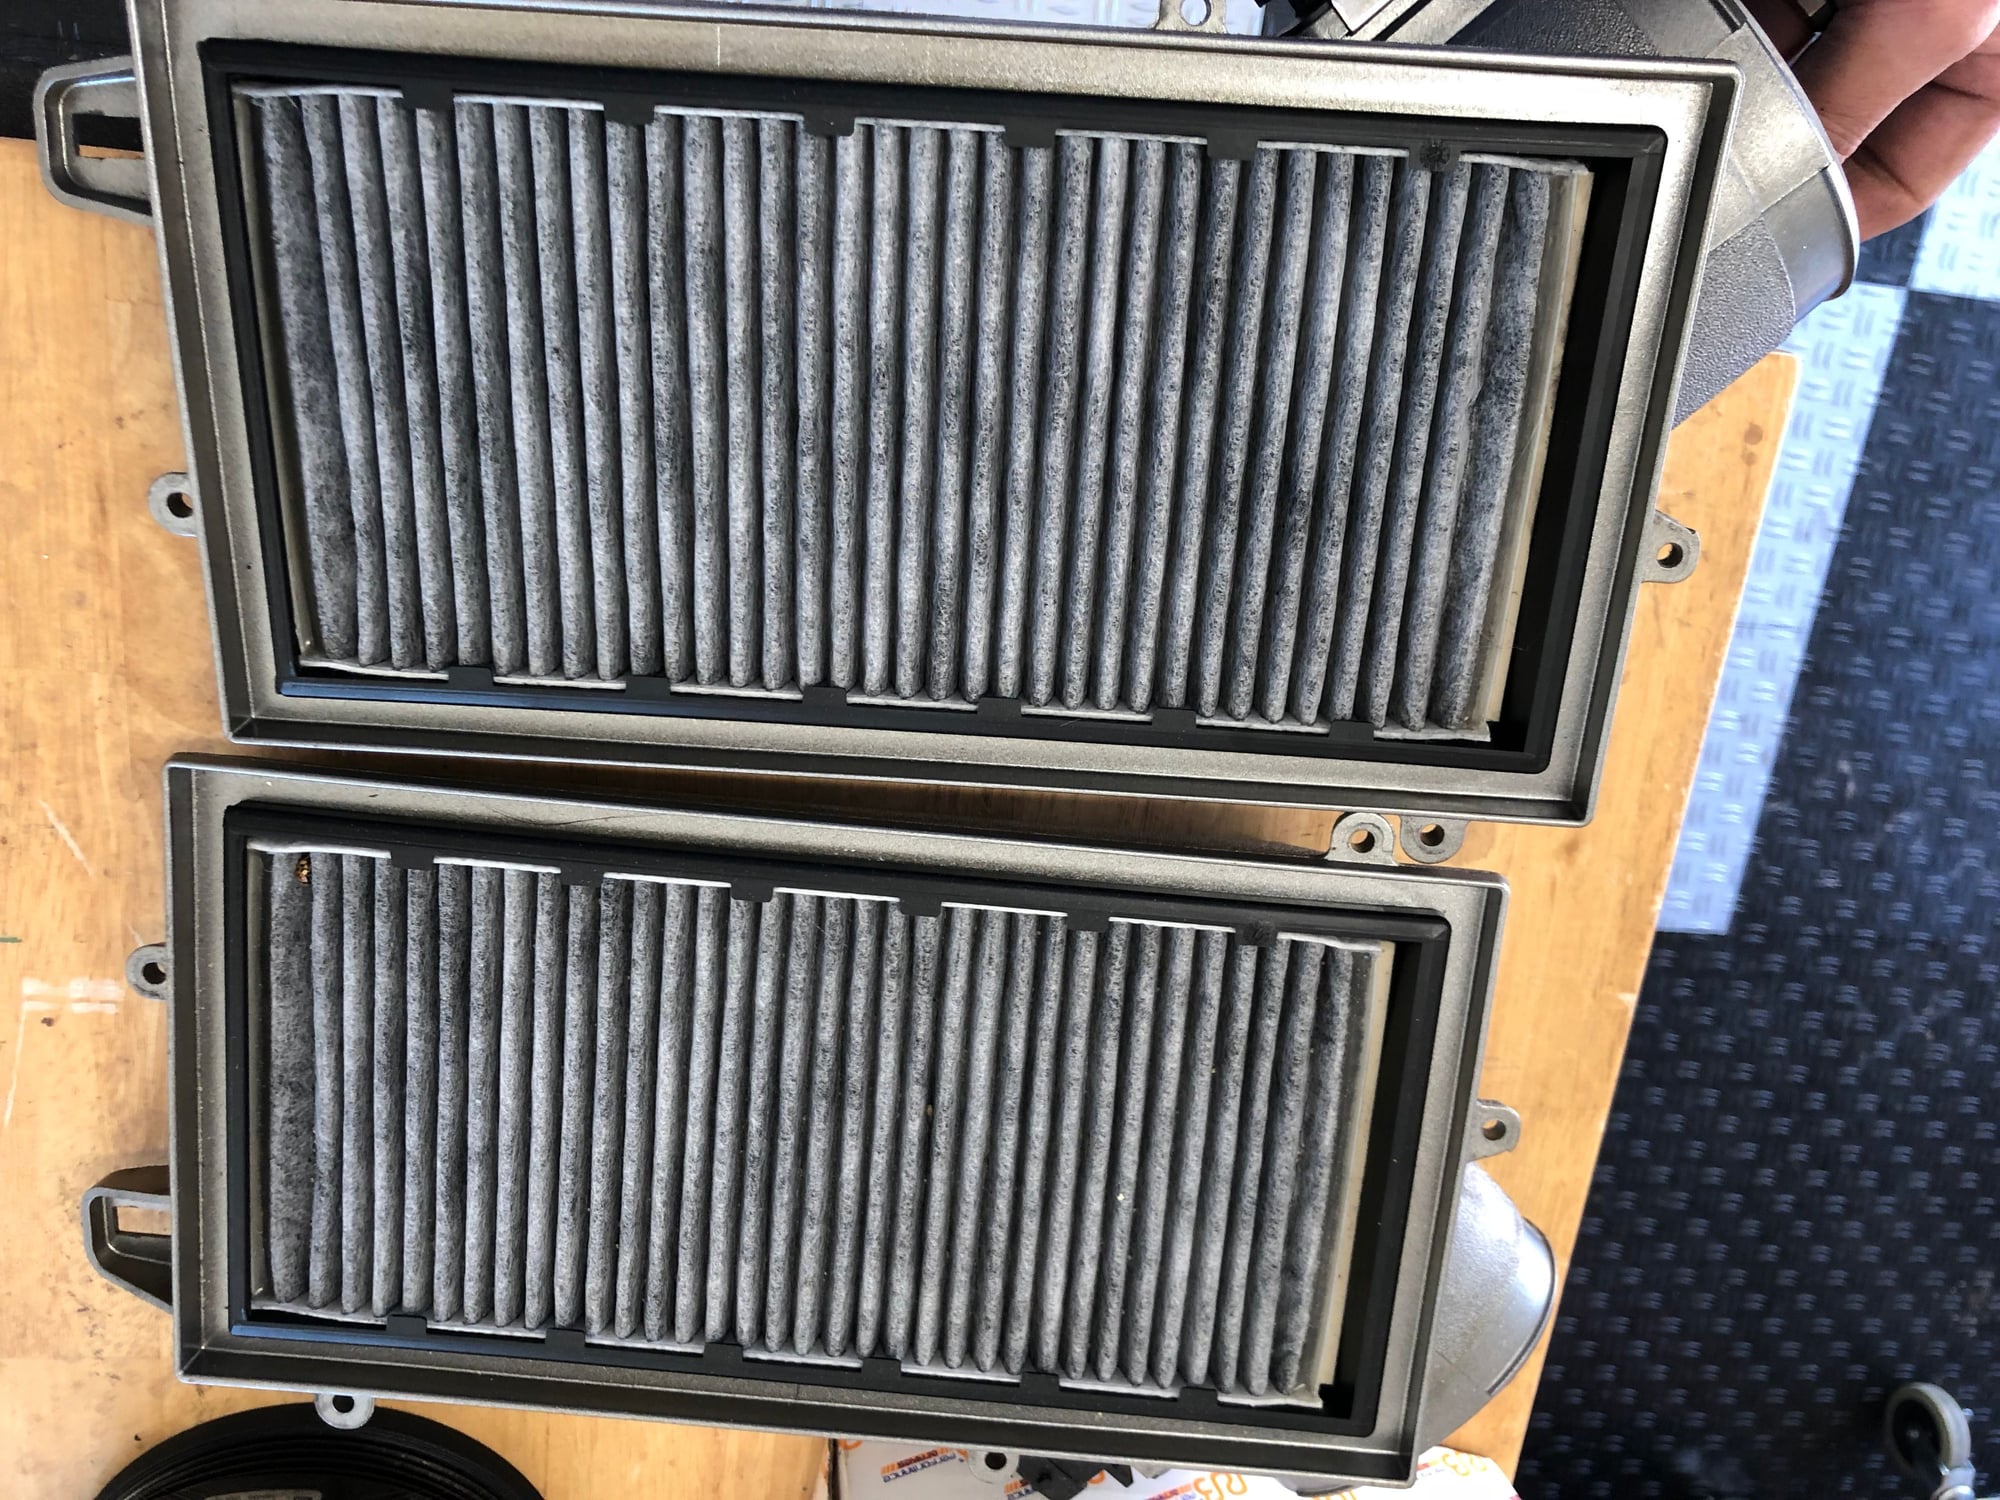 Engine - Intake/Fuel - m156 stock airboxes w/ MAF's and decent filters -$ 100 - Used - Houston, TX 77056, United States